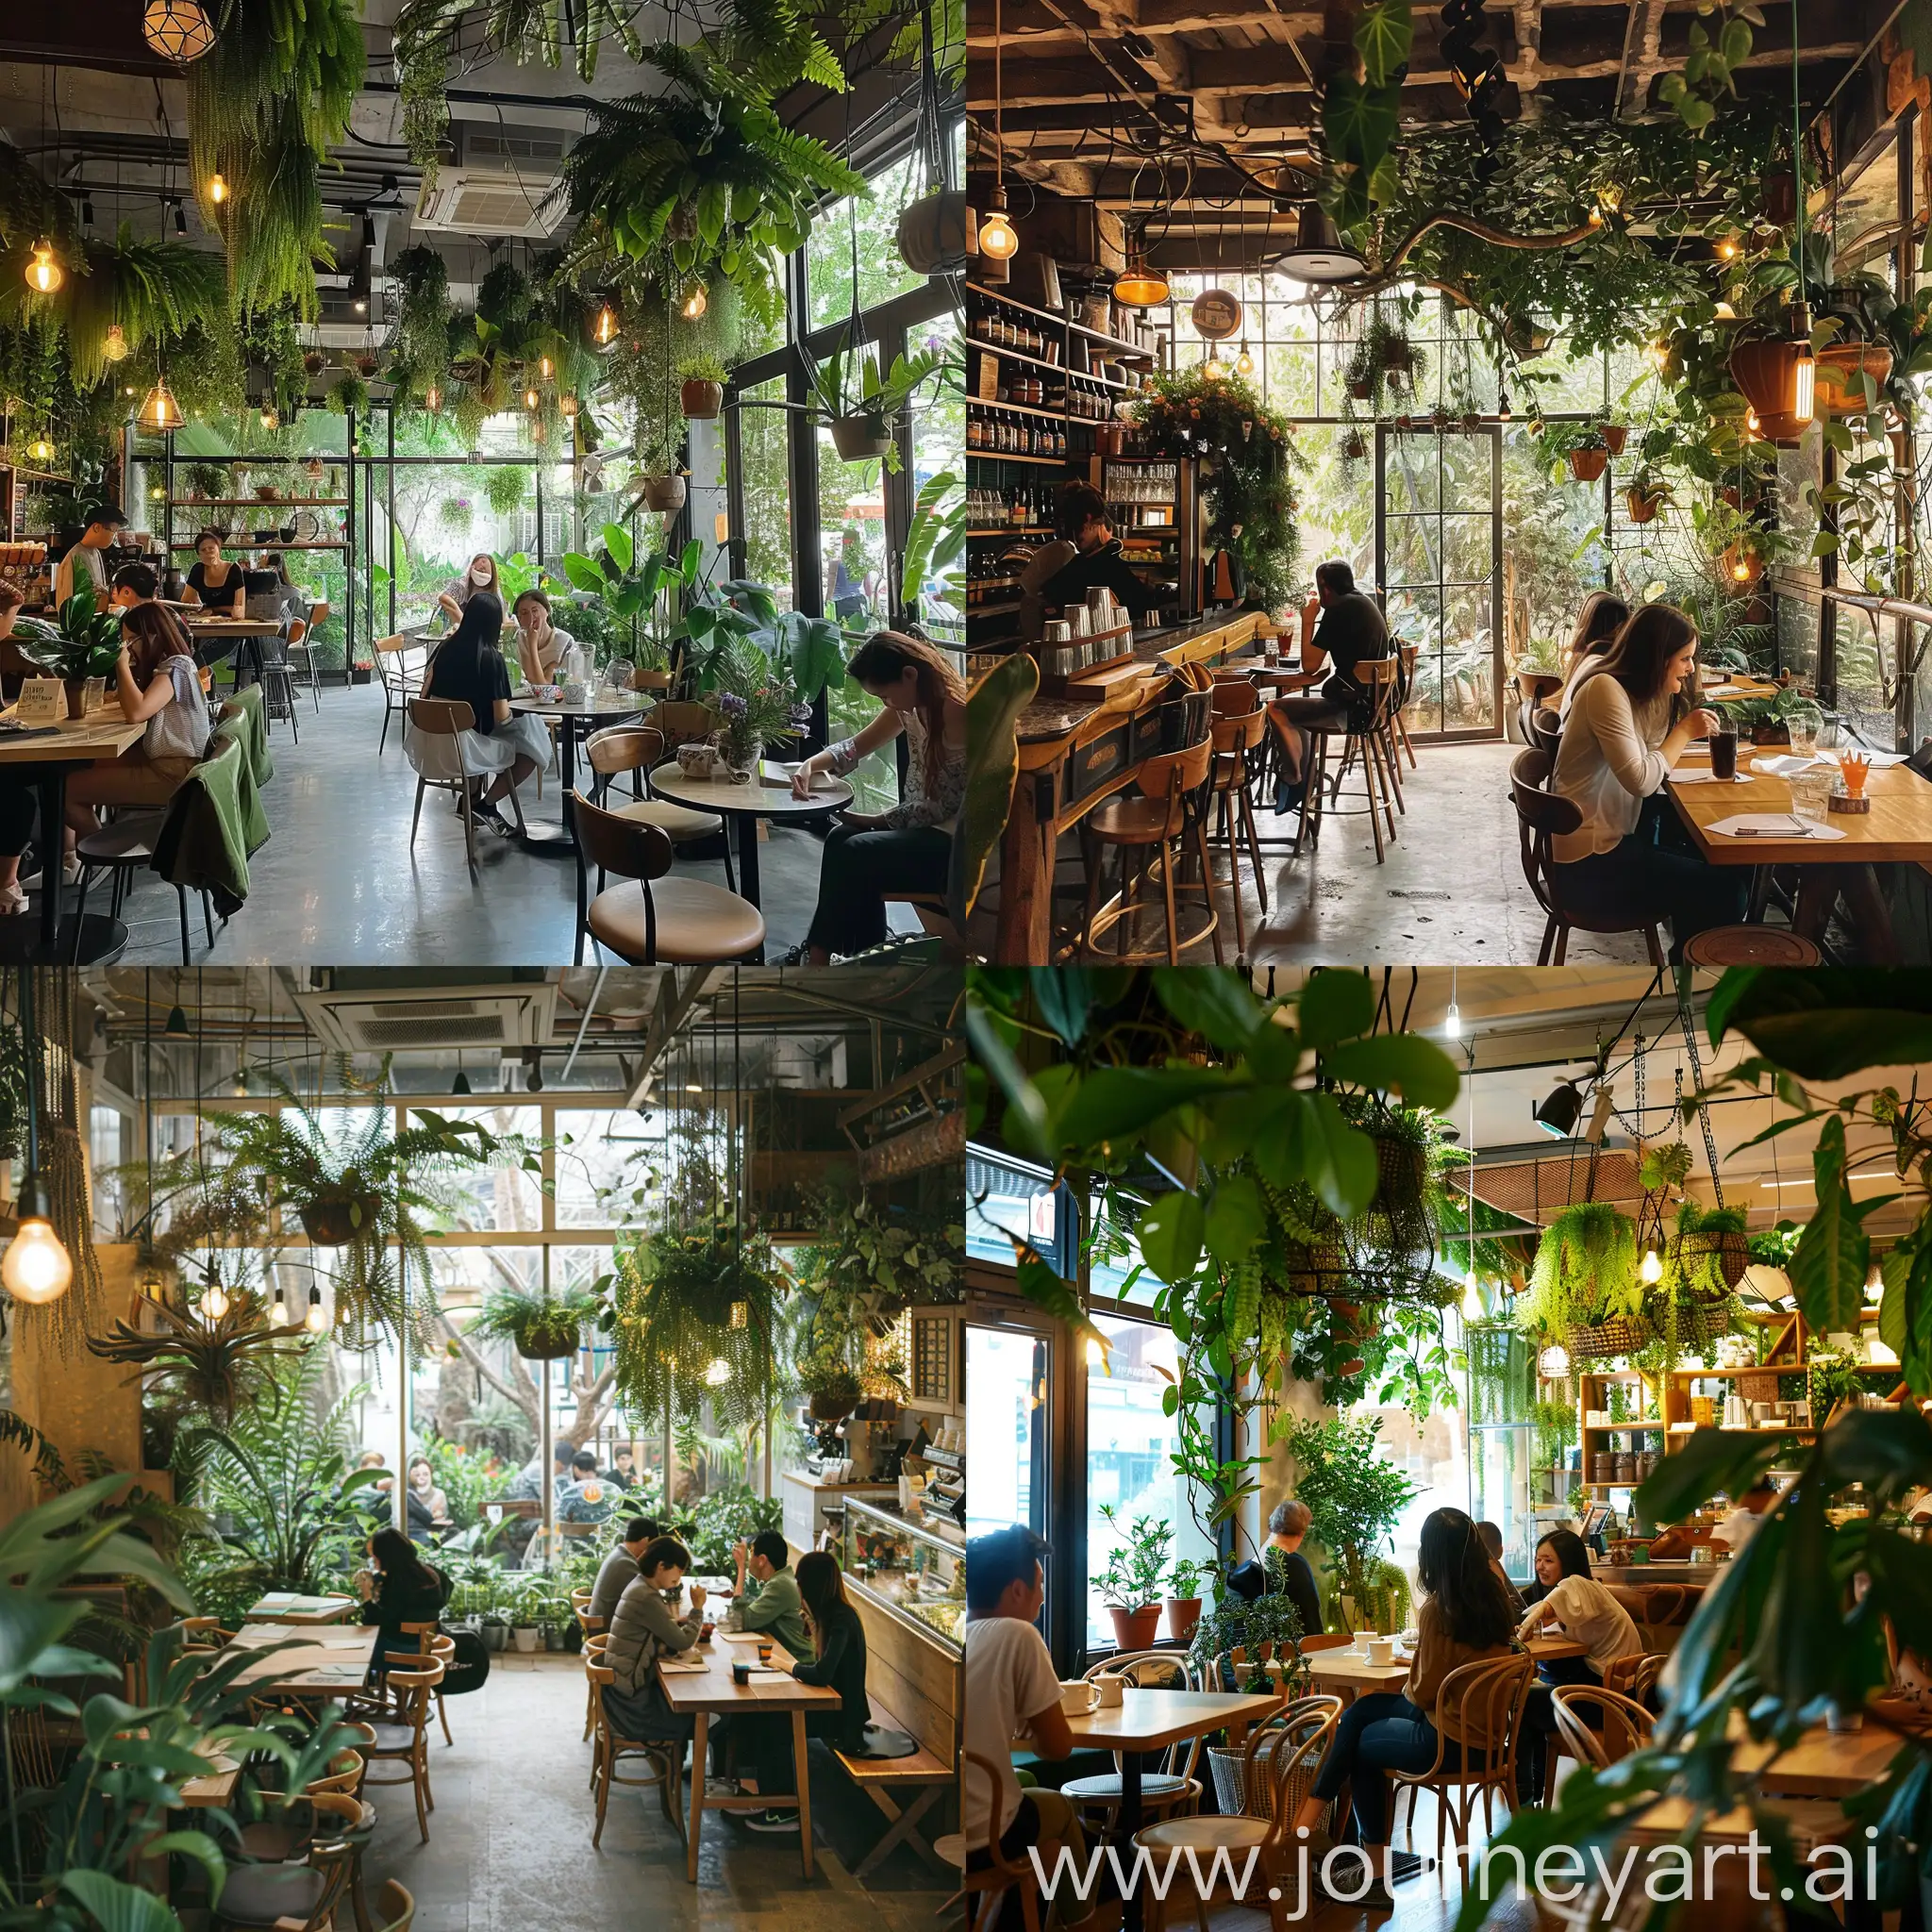 Inviting-Greenery-Cozy-Cafe-with-Satisfied-Guests